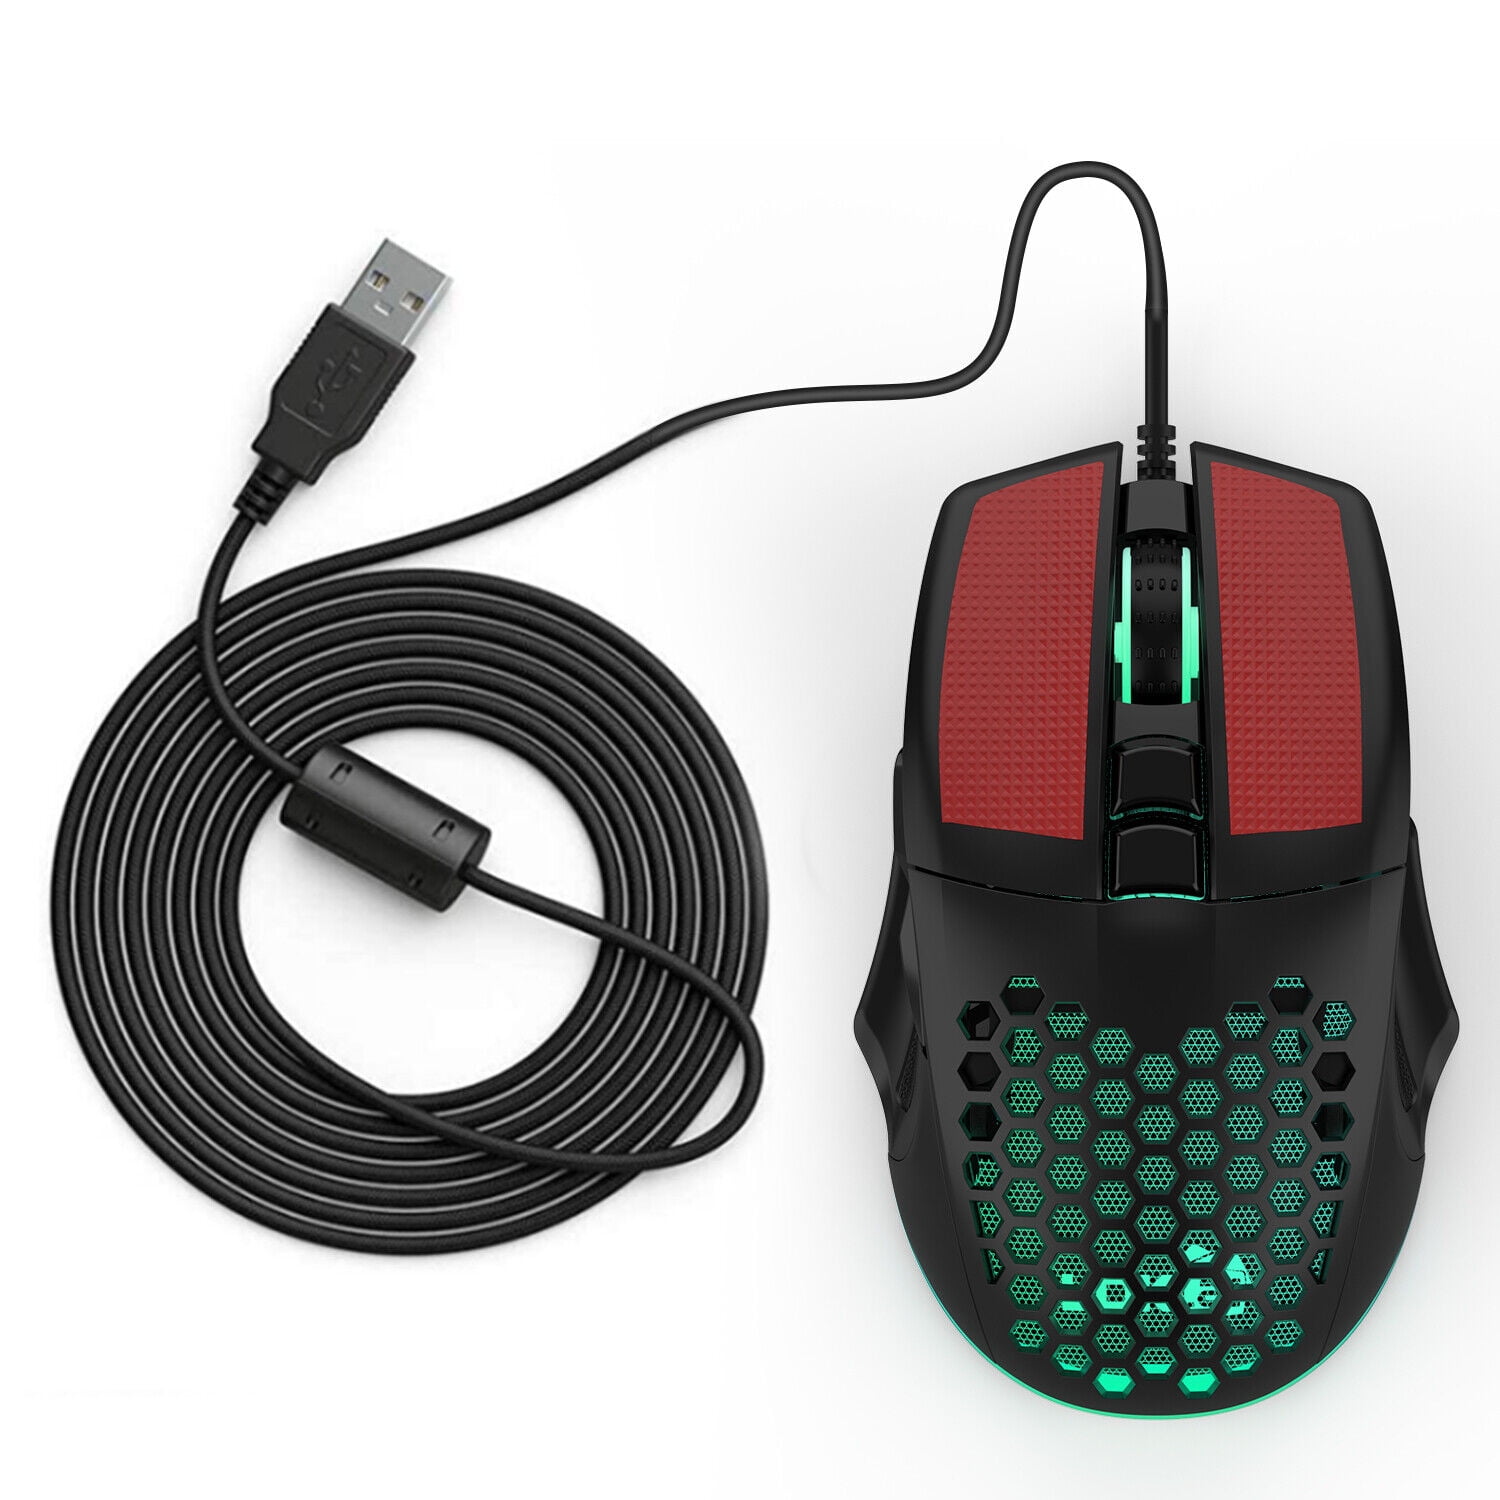 Gaming Mouse Under 1000, RPM Euro Games USB Wireless Gaming Mouse